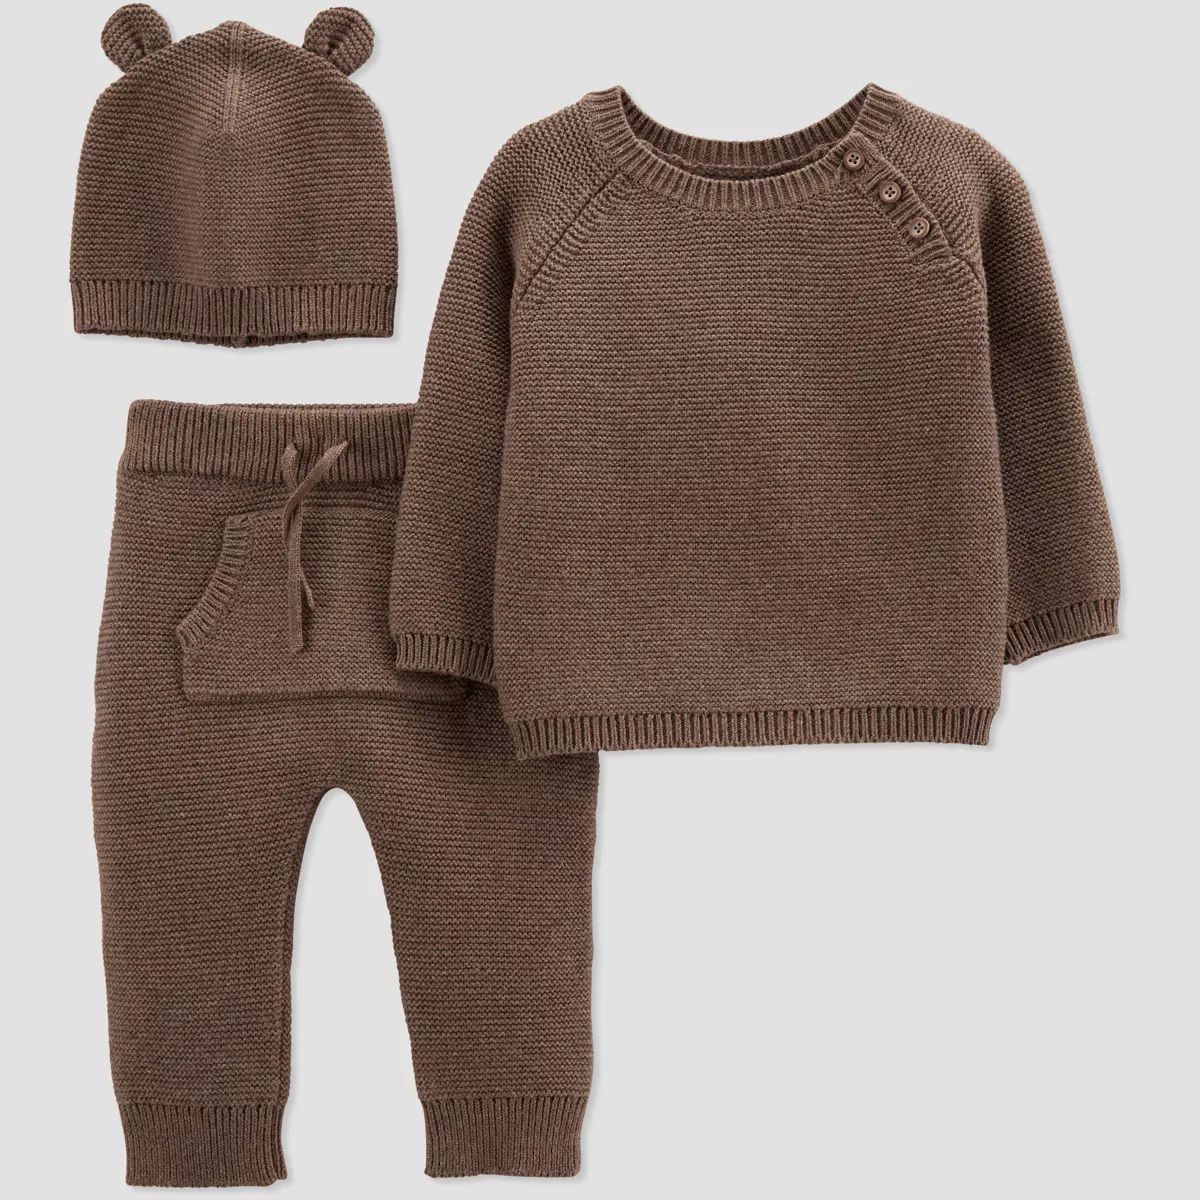 Carter's Just One You®️ Baby 3pc Sweater Top & Bottom Set - Brown | Target